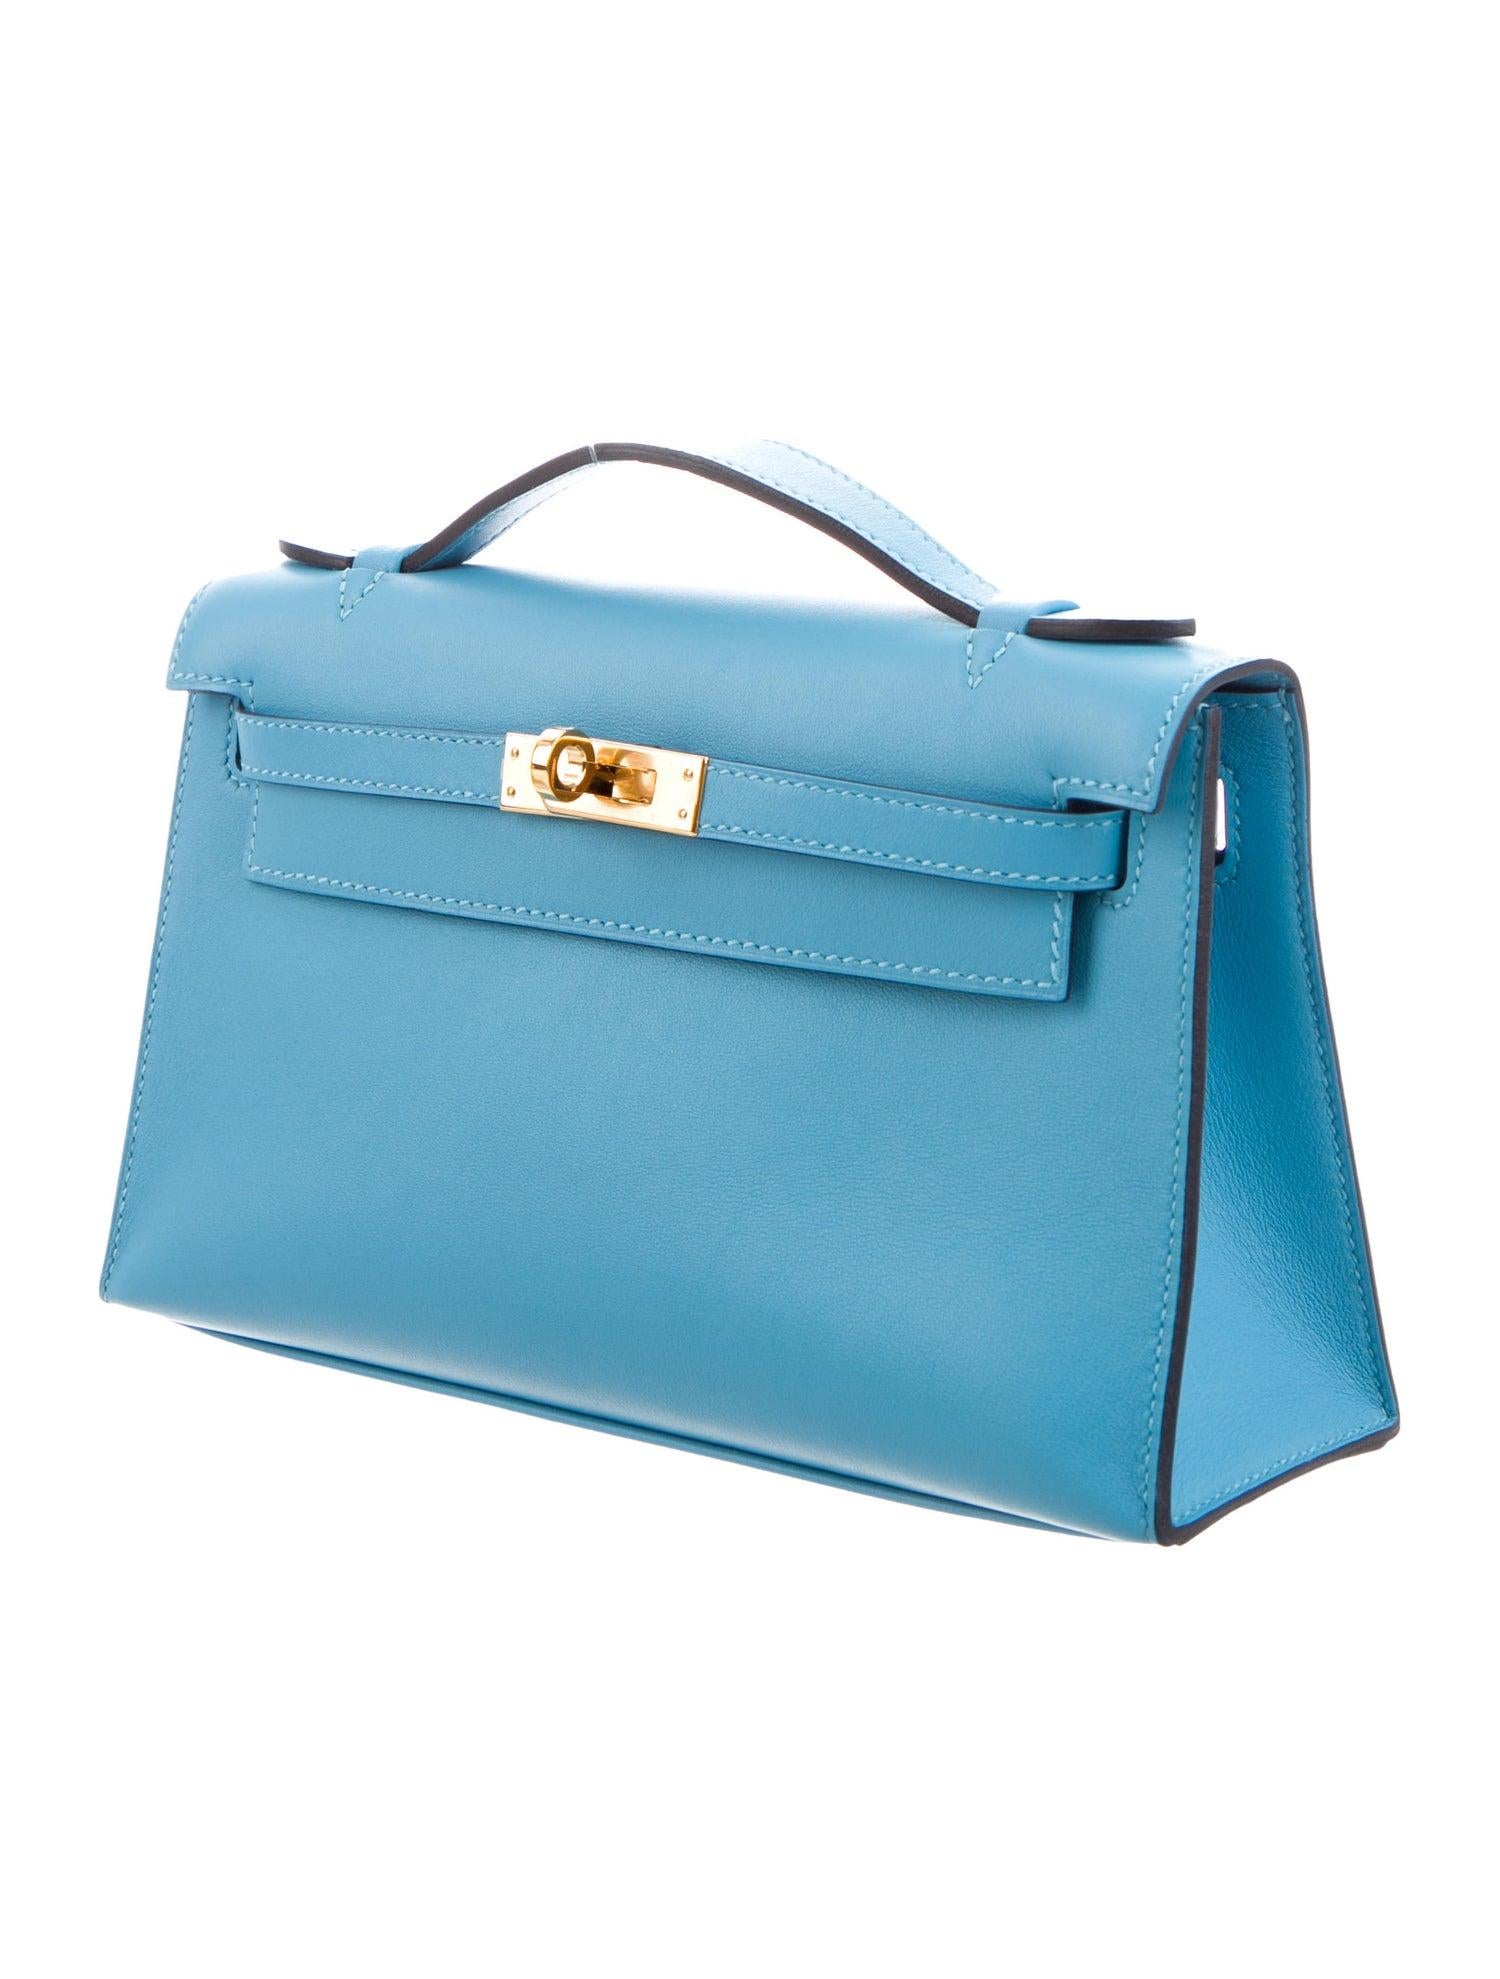 Women's Hermes NEW Baby Blue Leather Gold Top Handle Satchel Small Tote Bag in Box